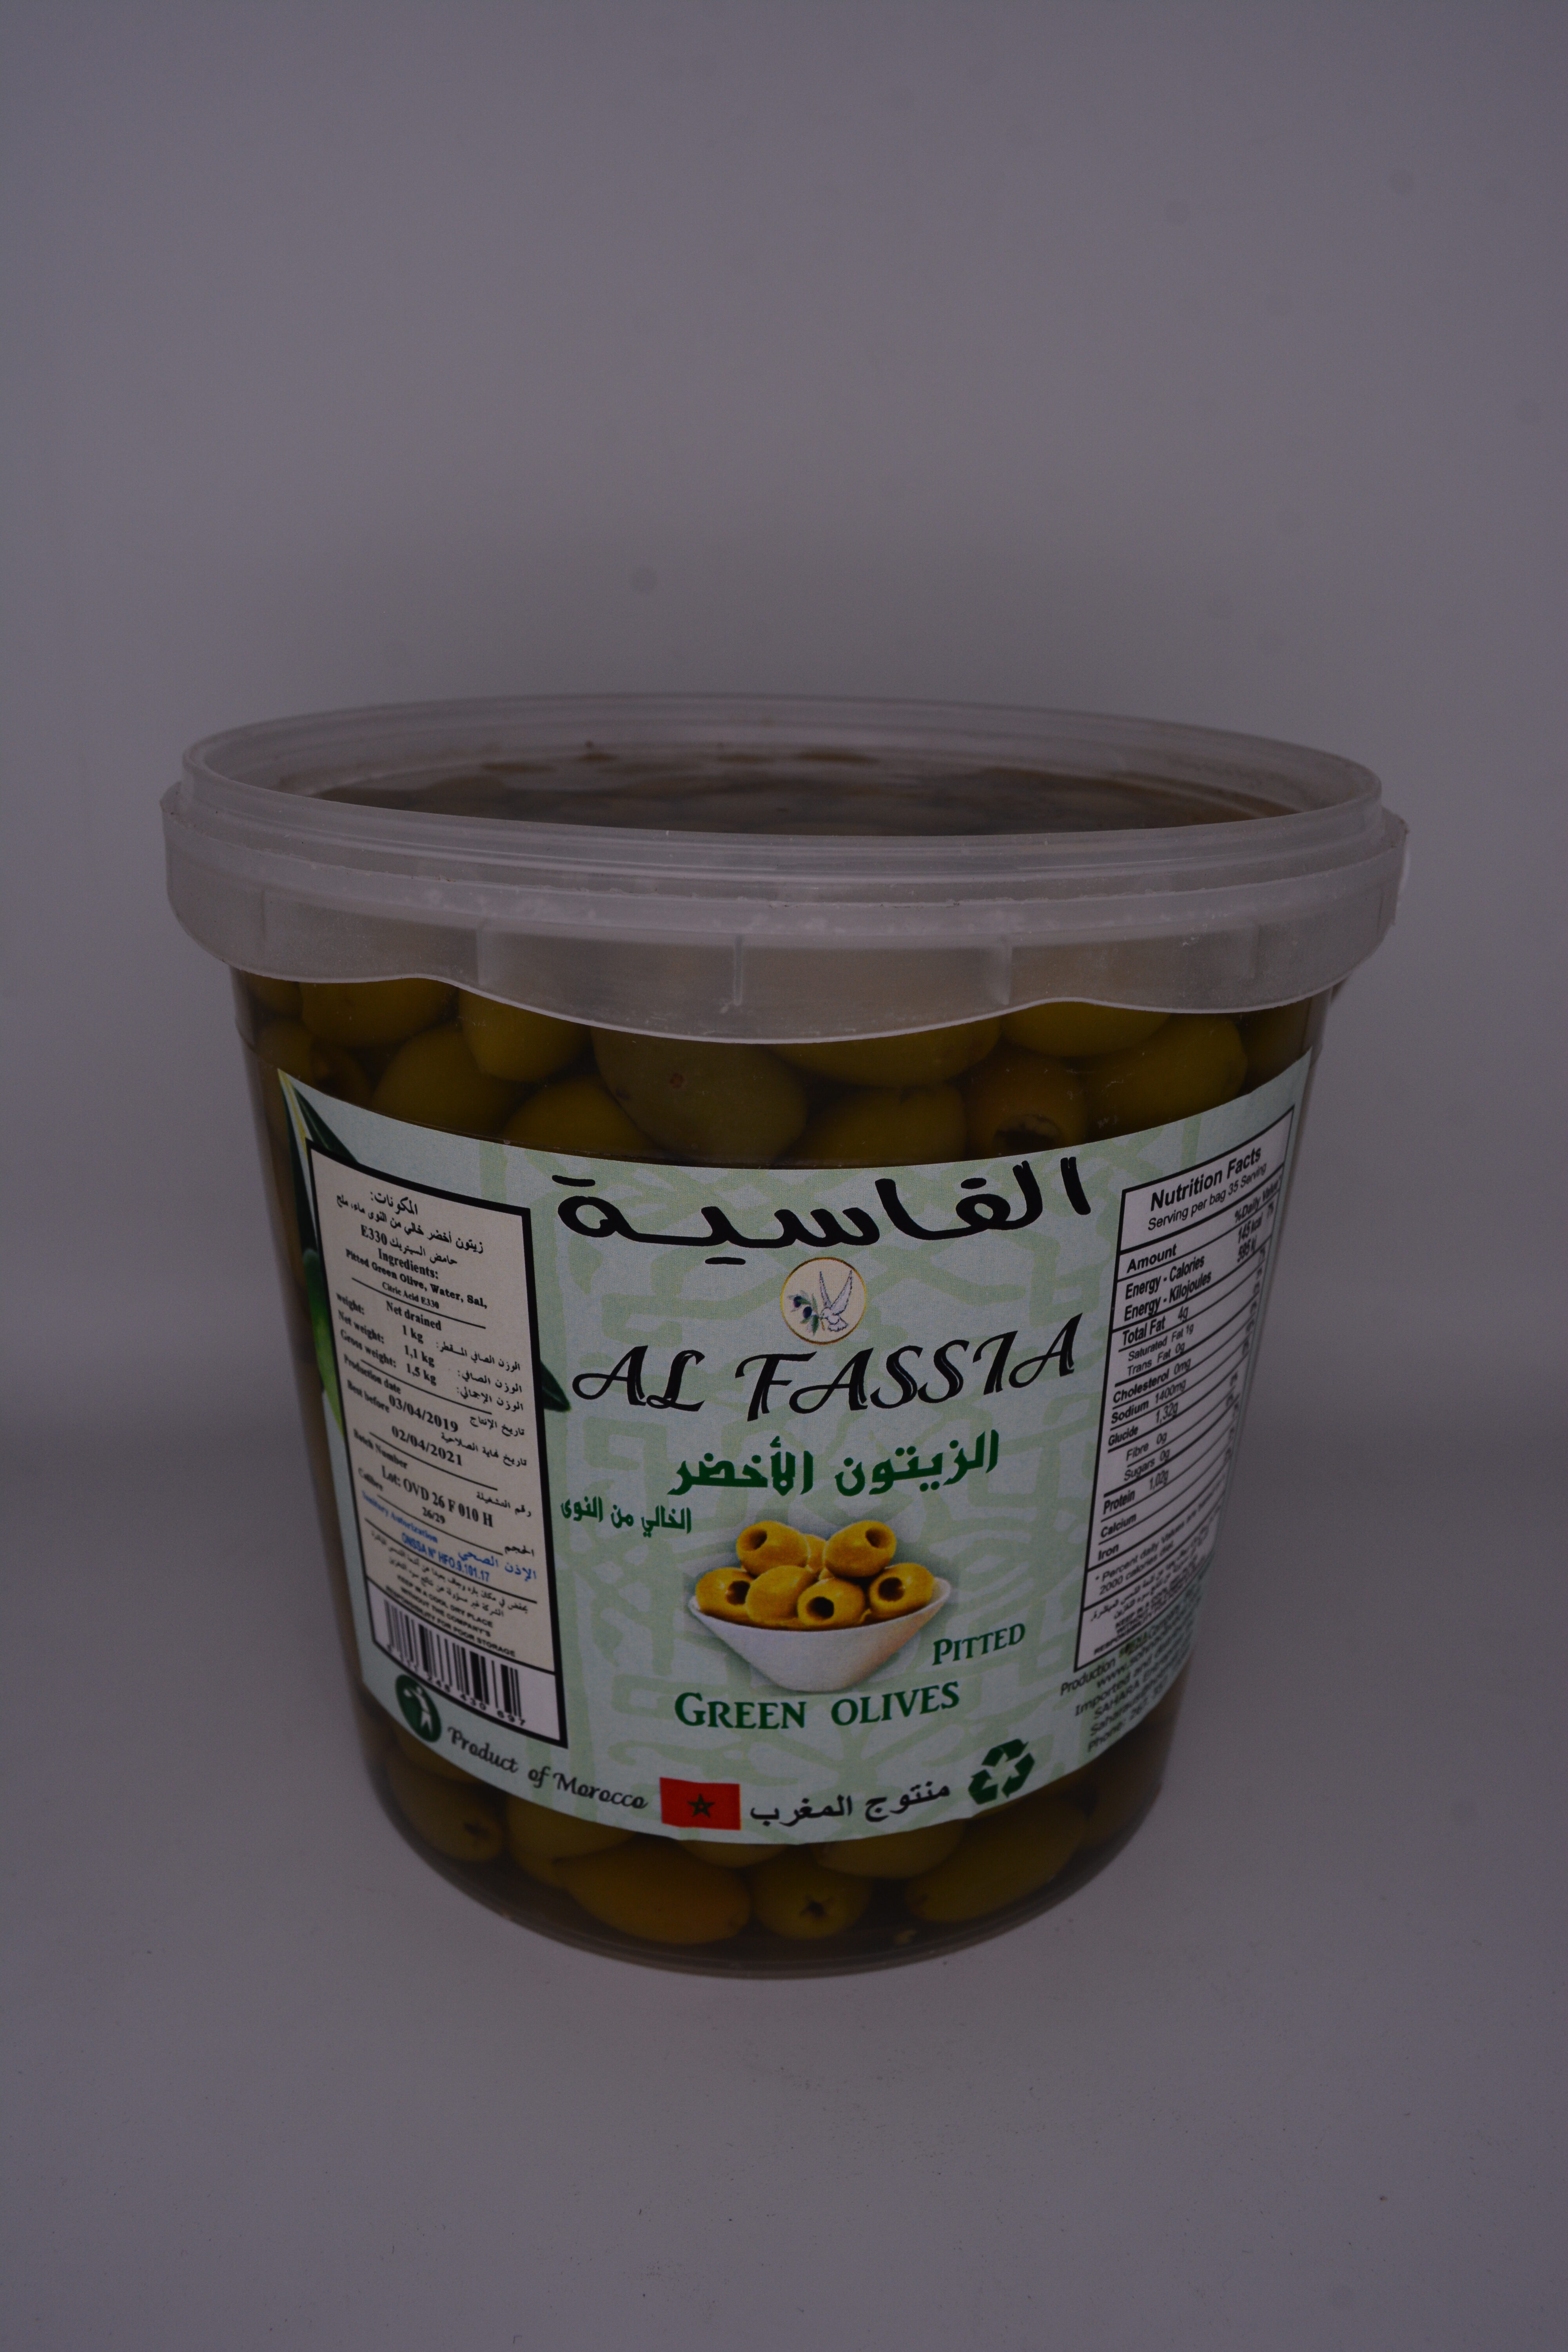 AL FASSIA PITTED GREEN OLIVES - Producto - en